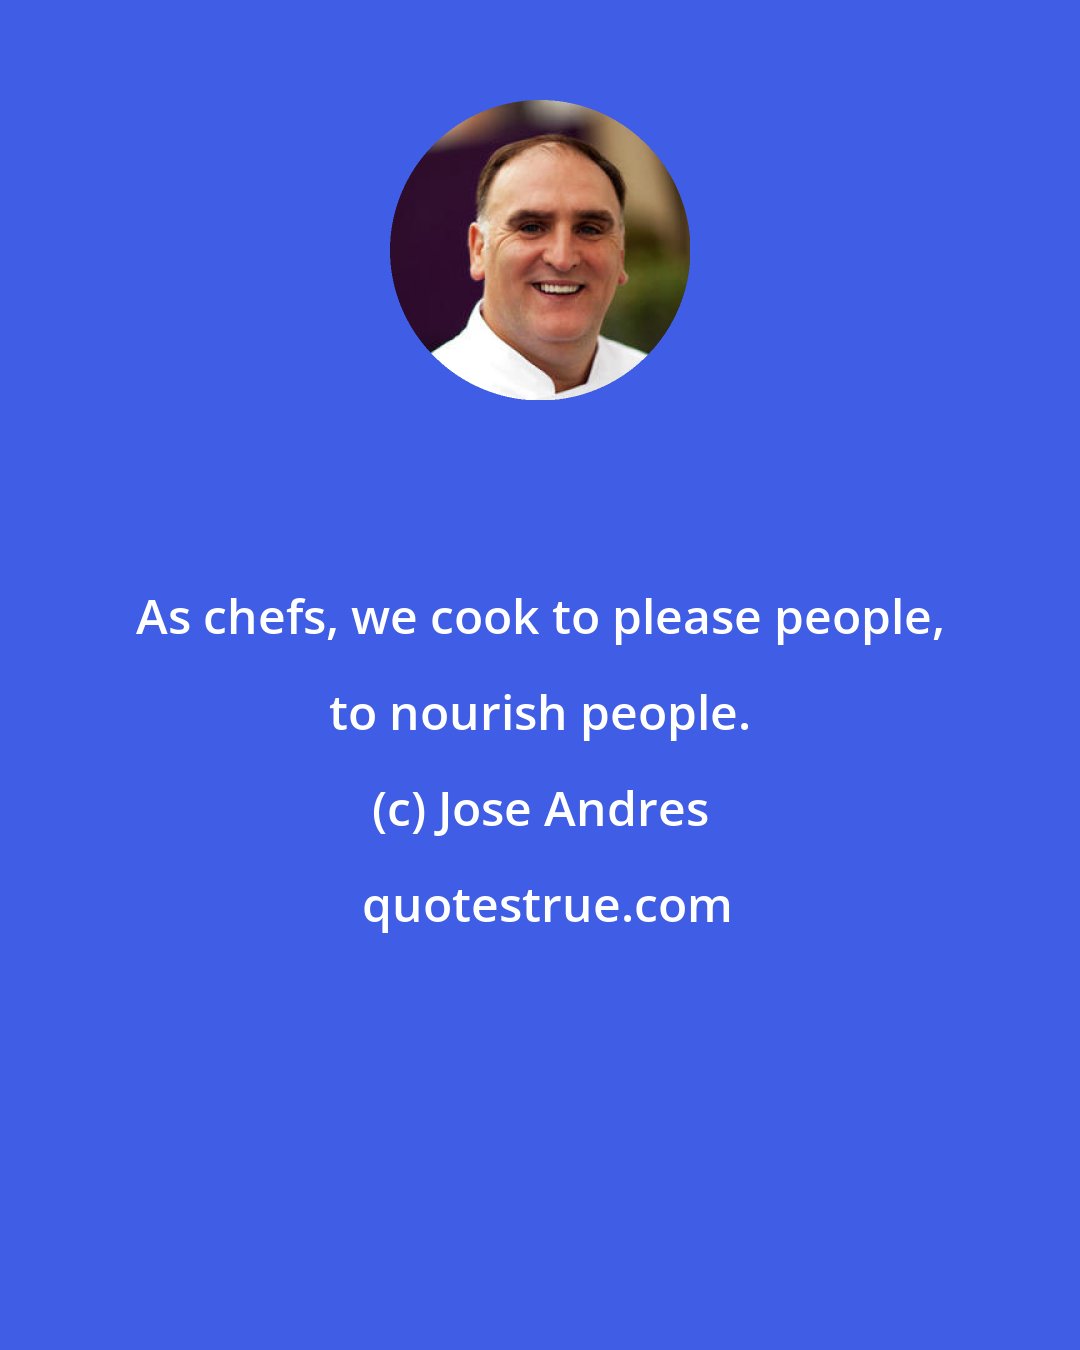 Jose Andres: As chefs, we cook to please people, to nourish people.